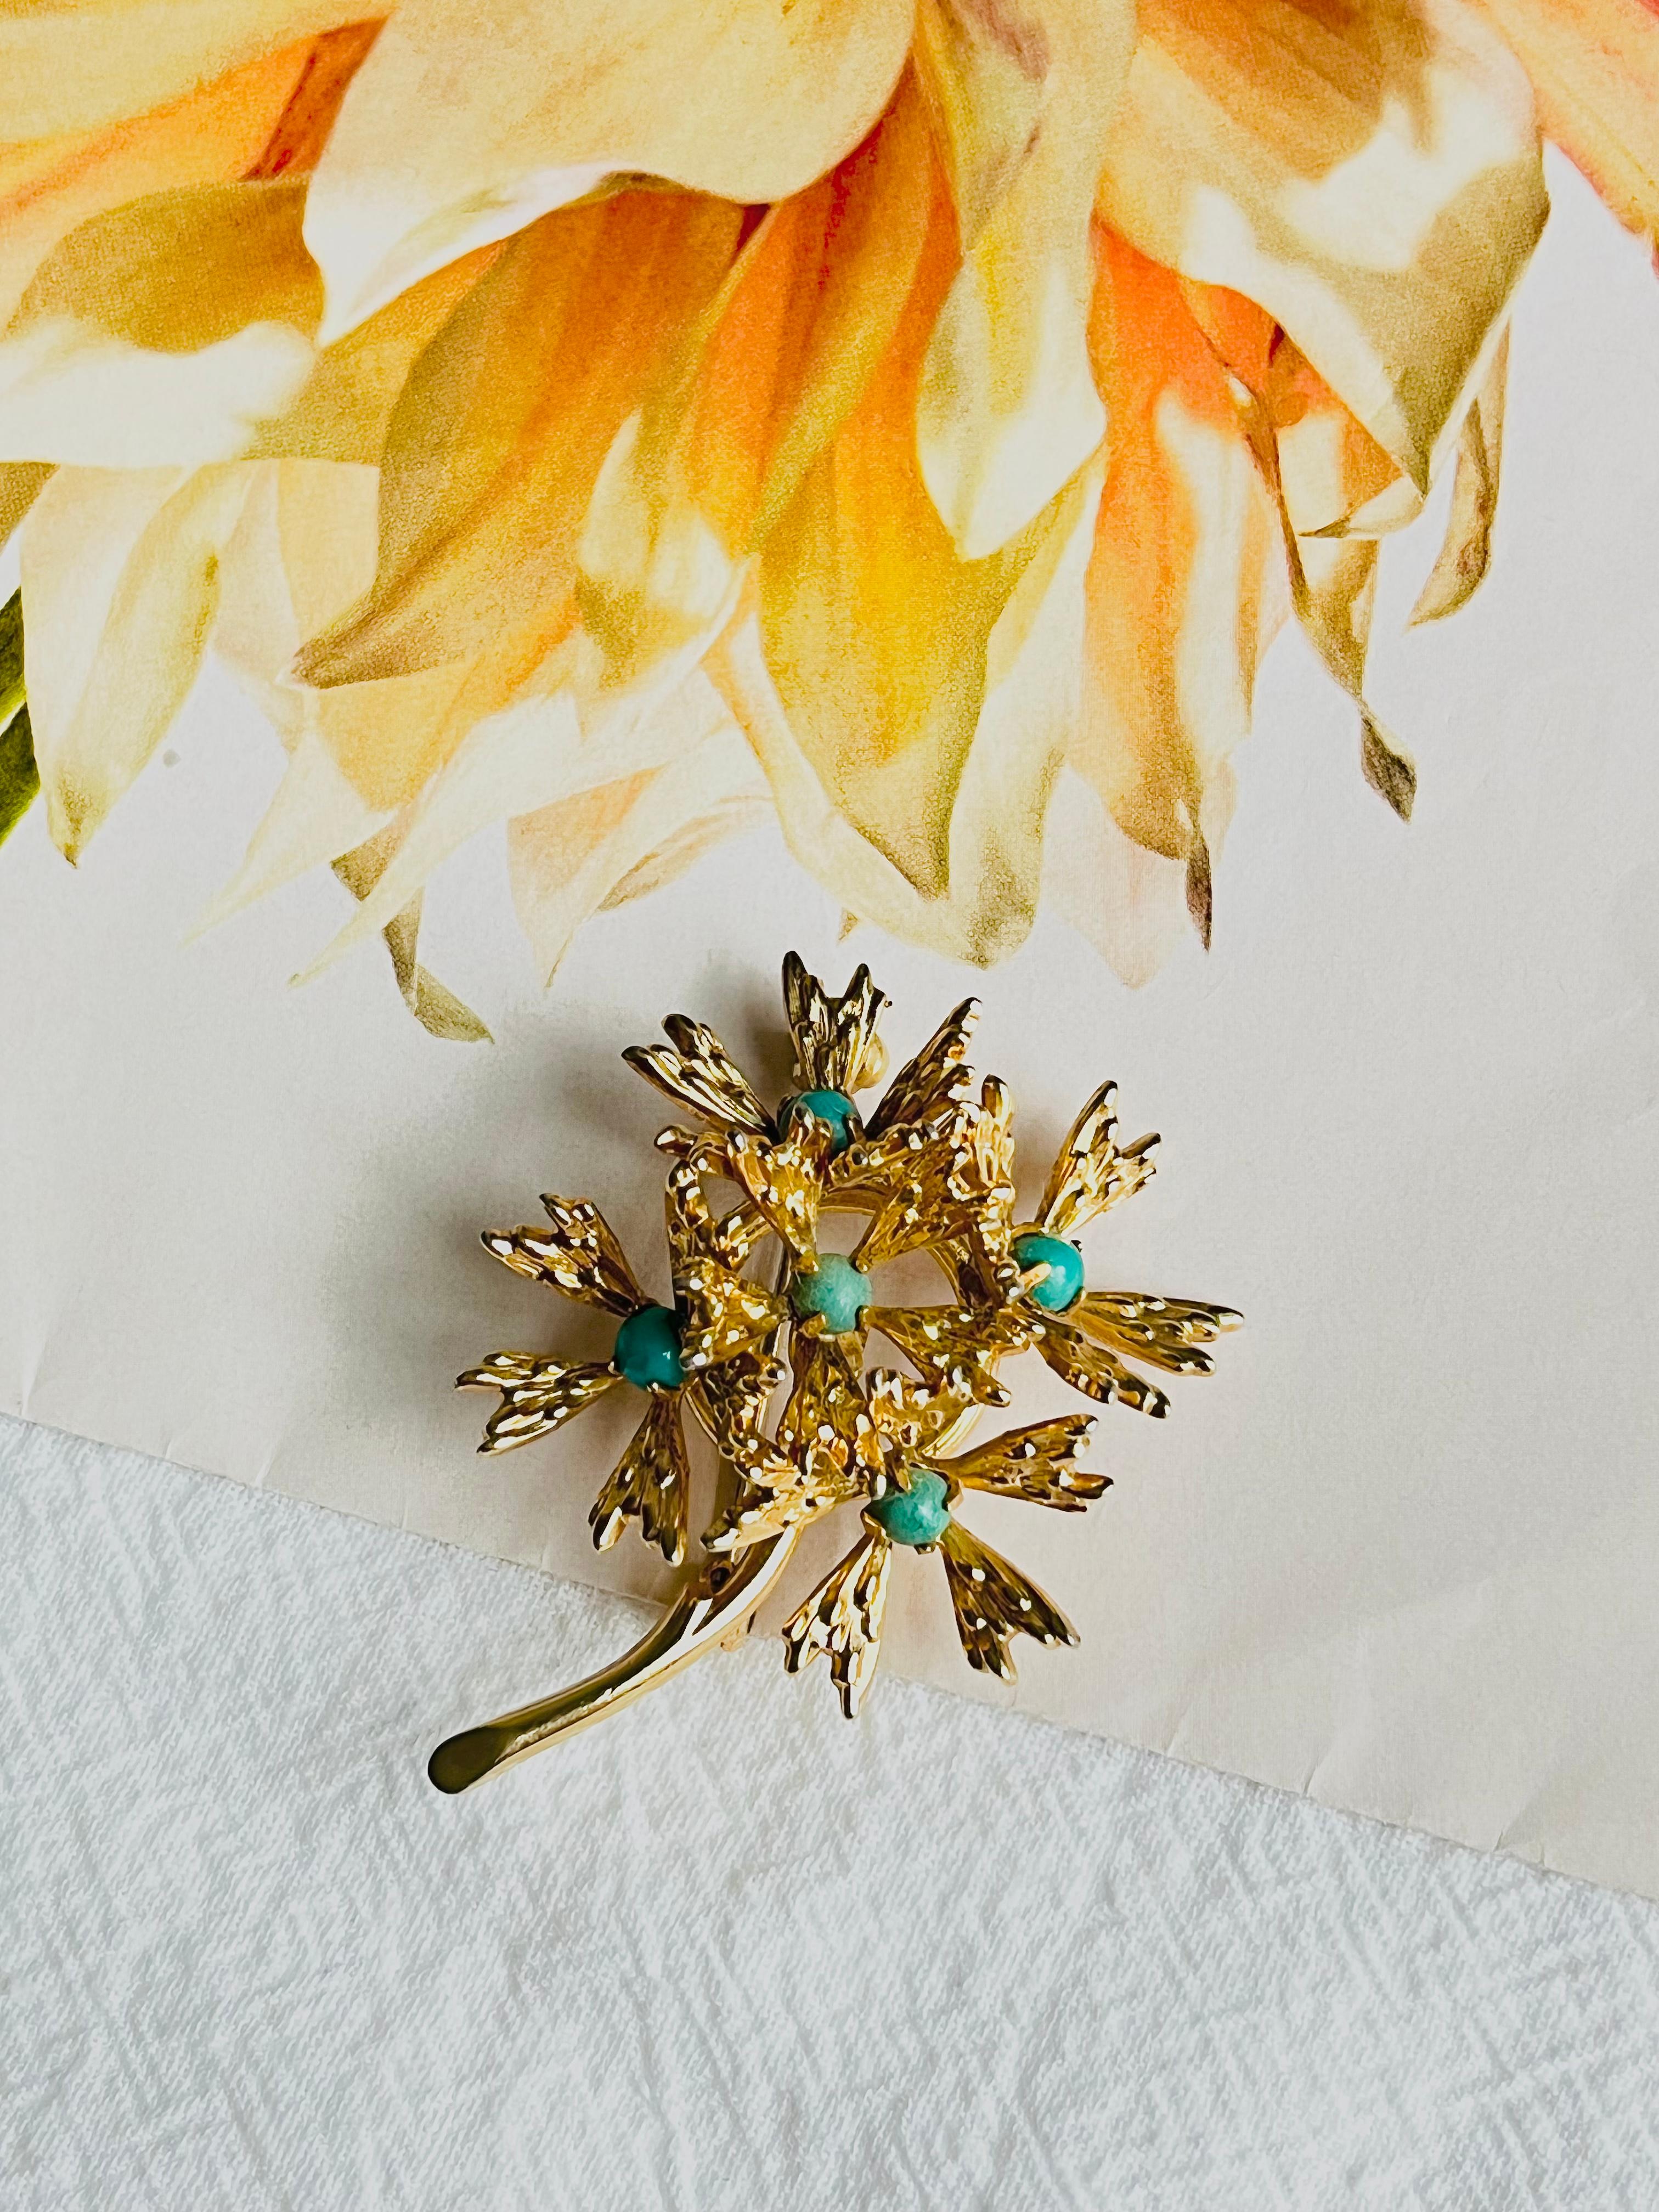 Christian Dior GROSSE 1965 Turquoise Stone Cluster Flower Bouquet Gold Brooch In Excellent Condition For Sale In Wokingham, England